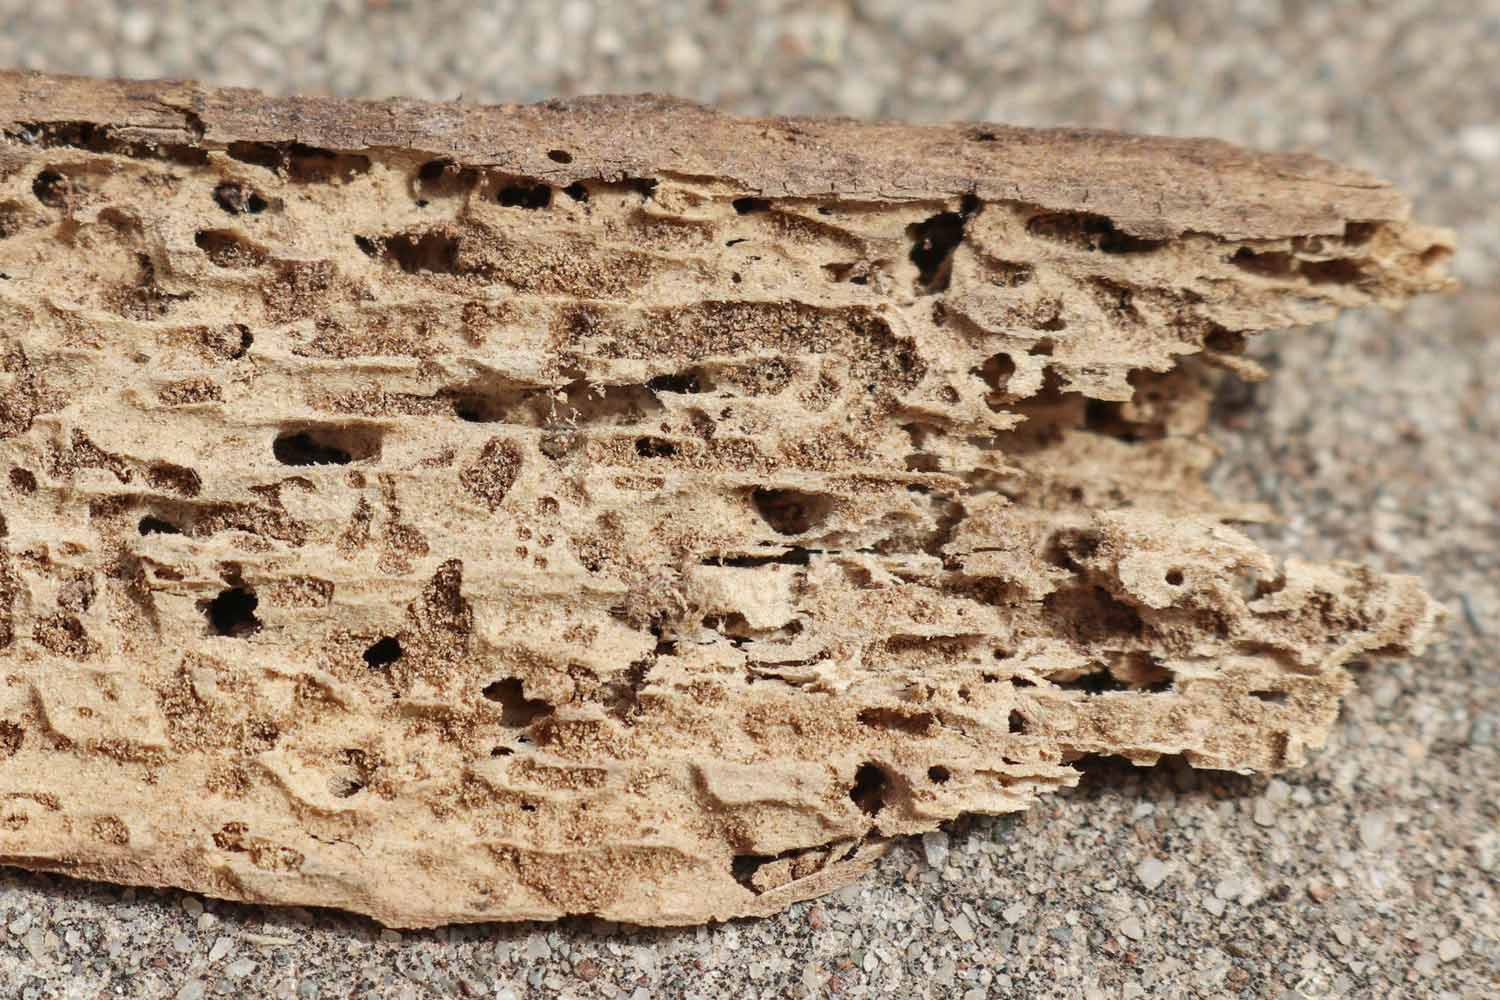 Termite damaged timber showing holes and tunnels made by the wood chewing insects